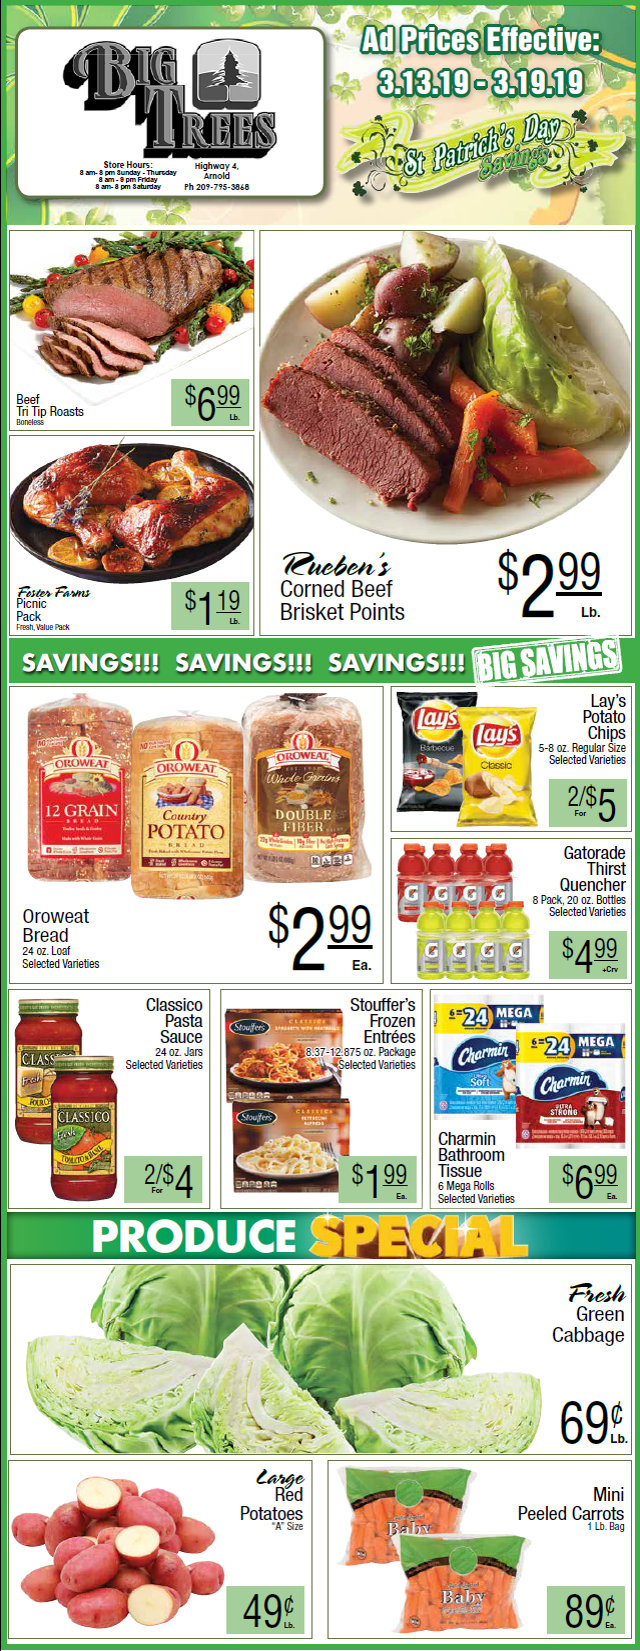 Big Trees Market Weekly Ad & Grocery Specials Through March 19th